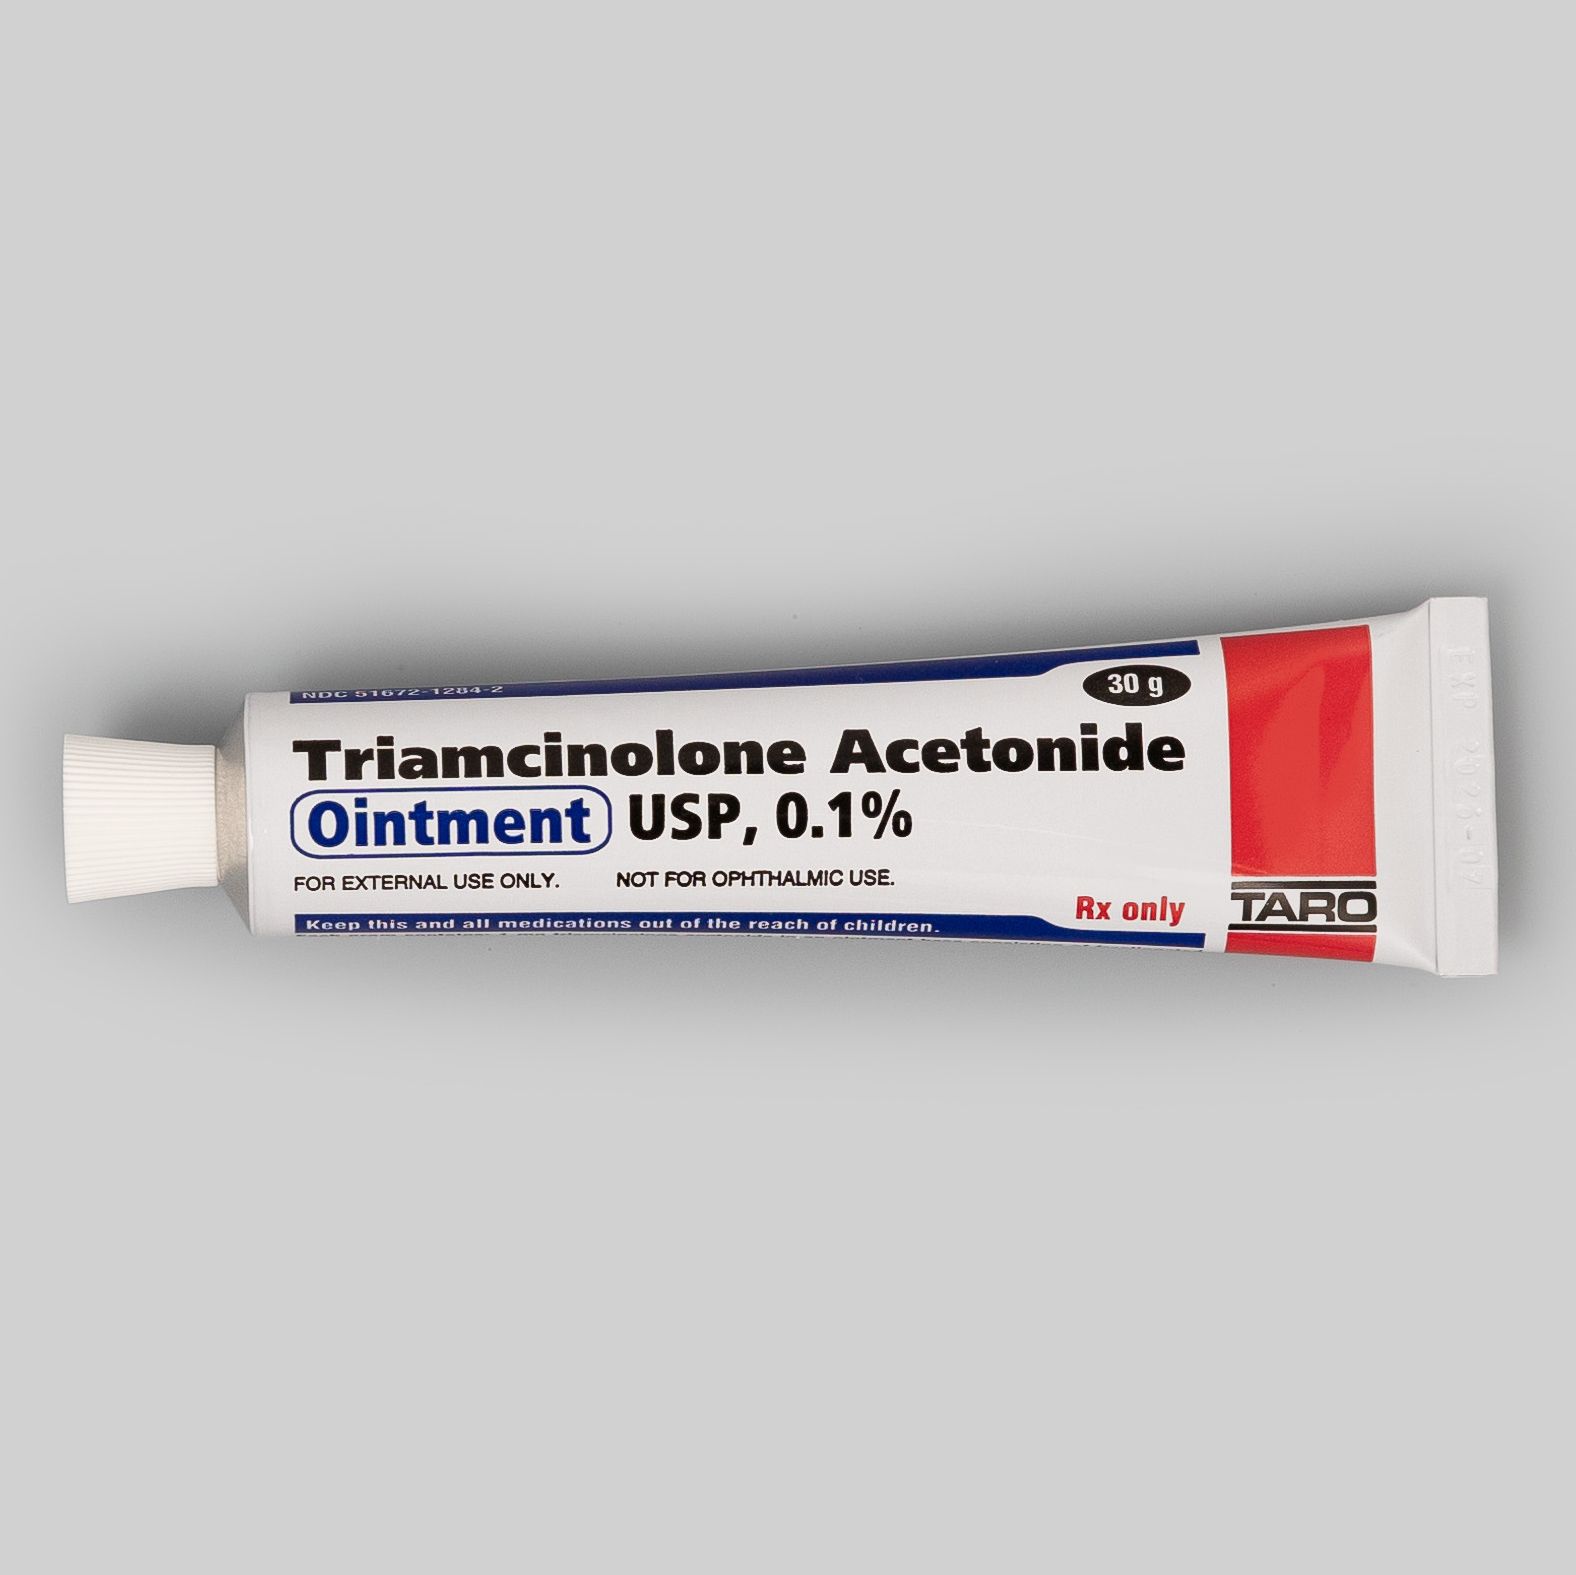 An image of triamcinolone ointment